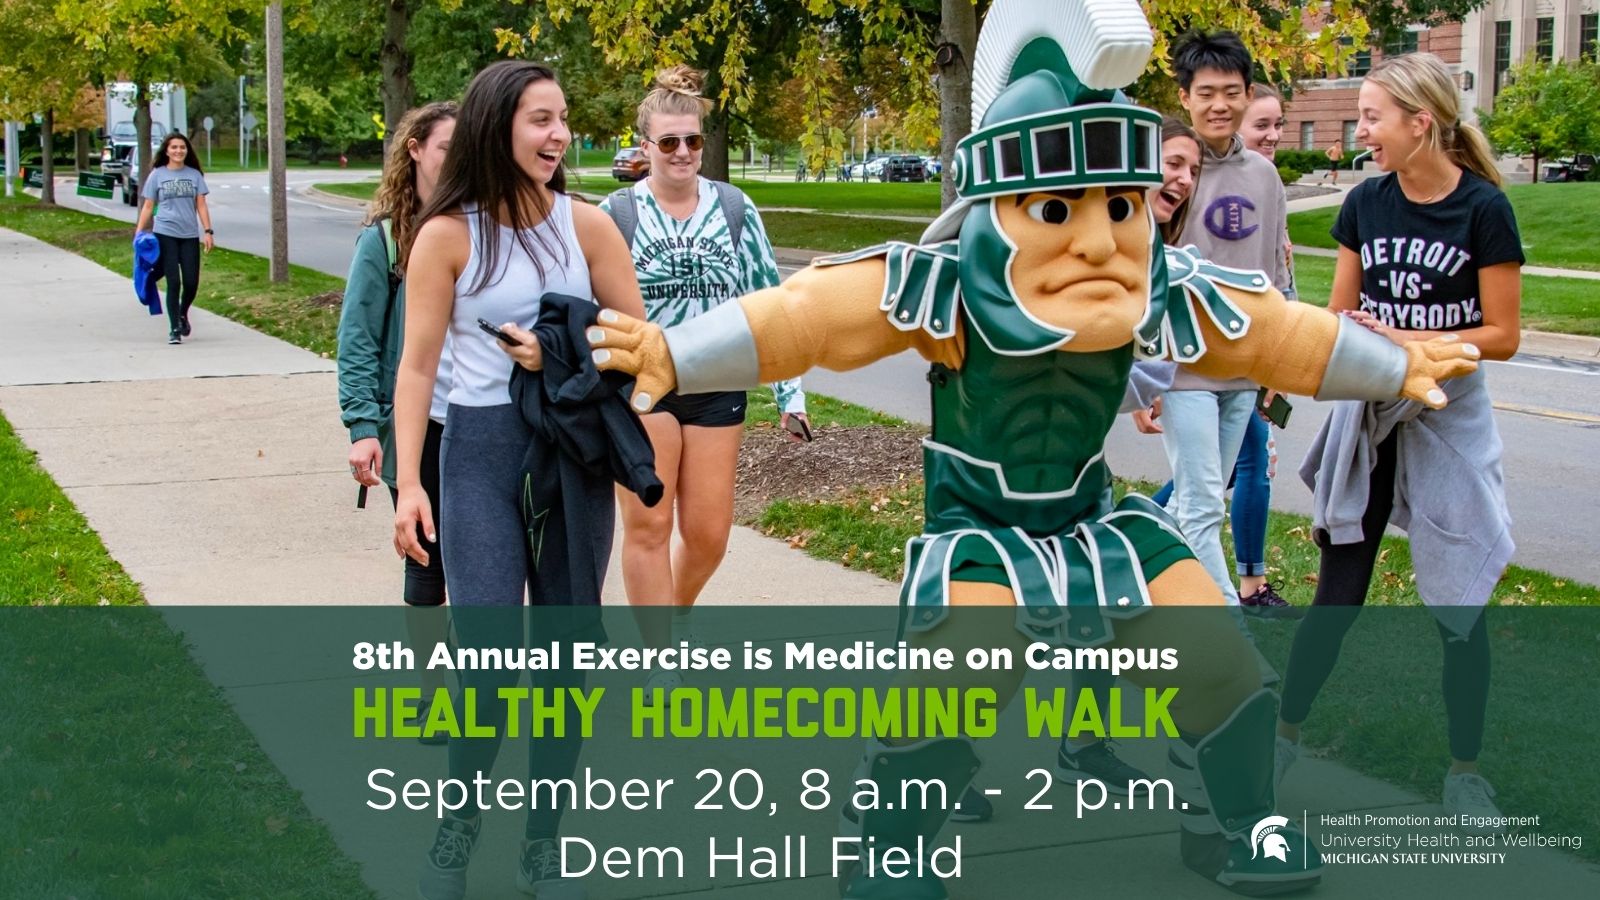 Sparty flexes his muscles in front of a sign advertising the Healthy Homecoming Walk. The event date and time appears to the right. 